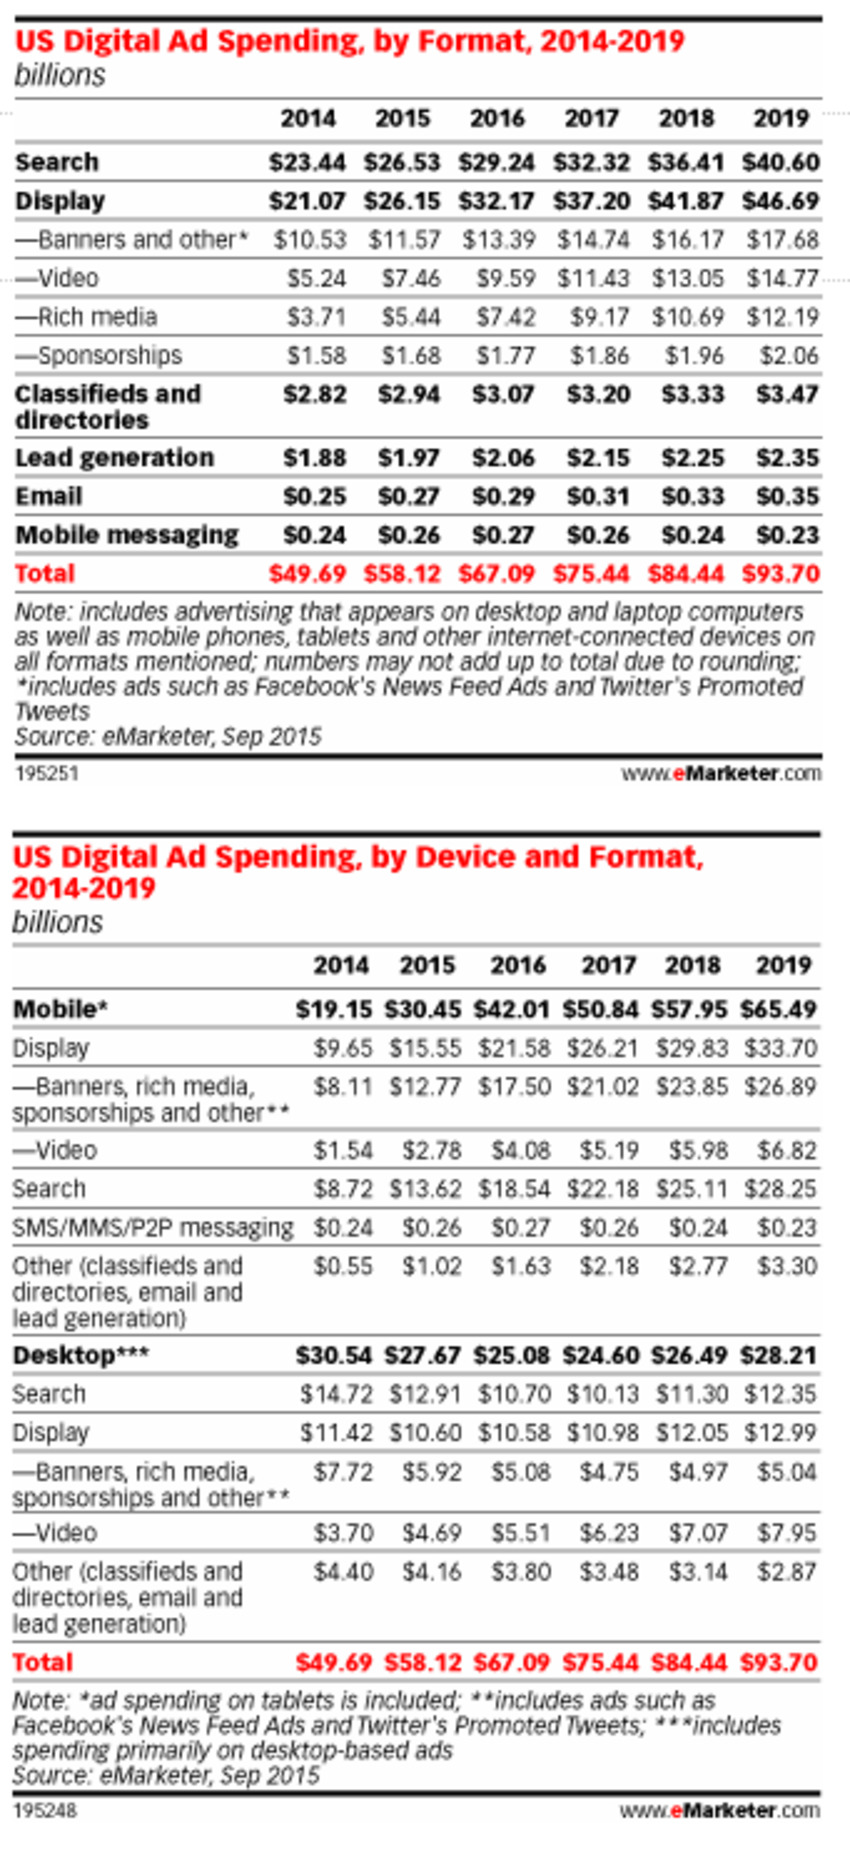 US Digital Display Ad Spending to Surpass Search Ad Spending in 2016 - eMarketer | The MarTech Digest | Scoop.it